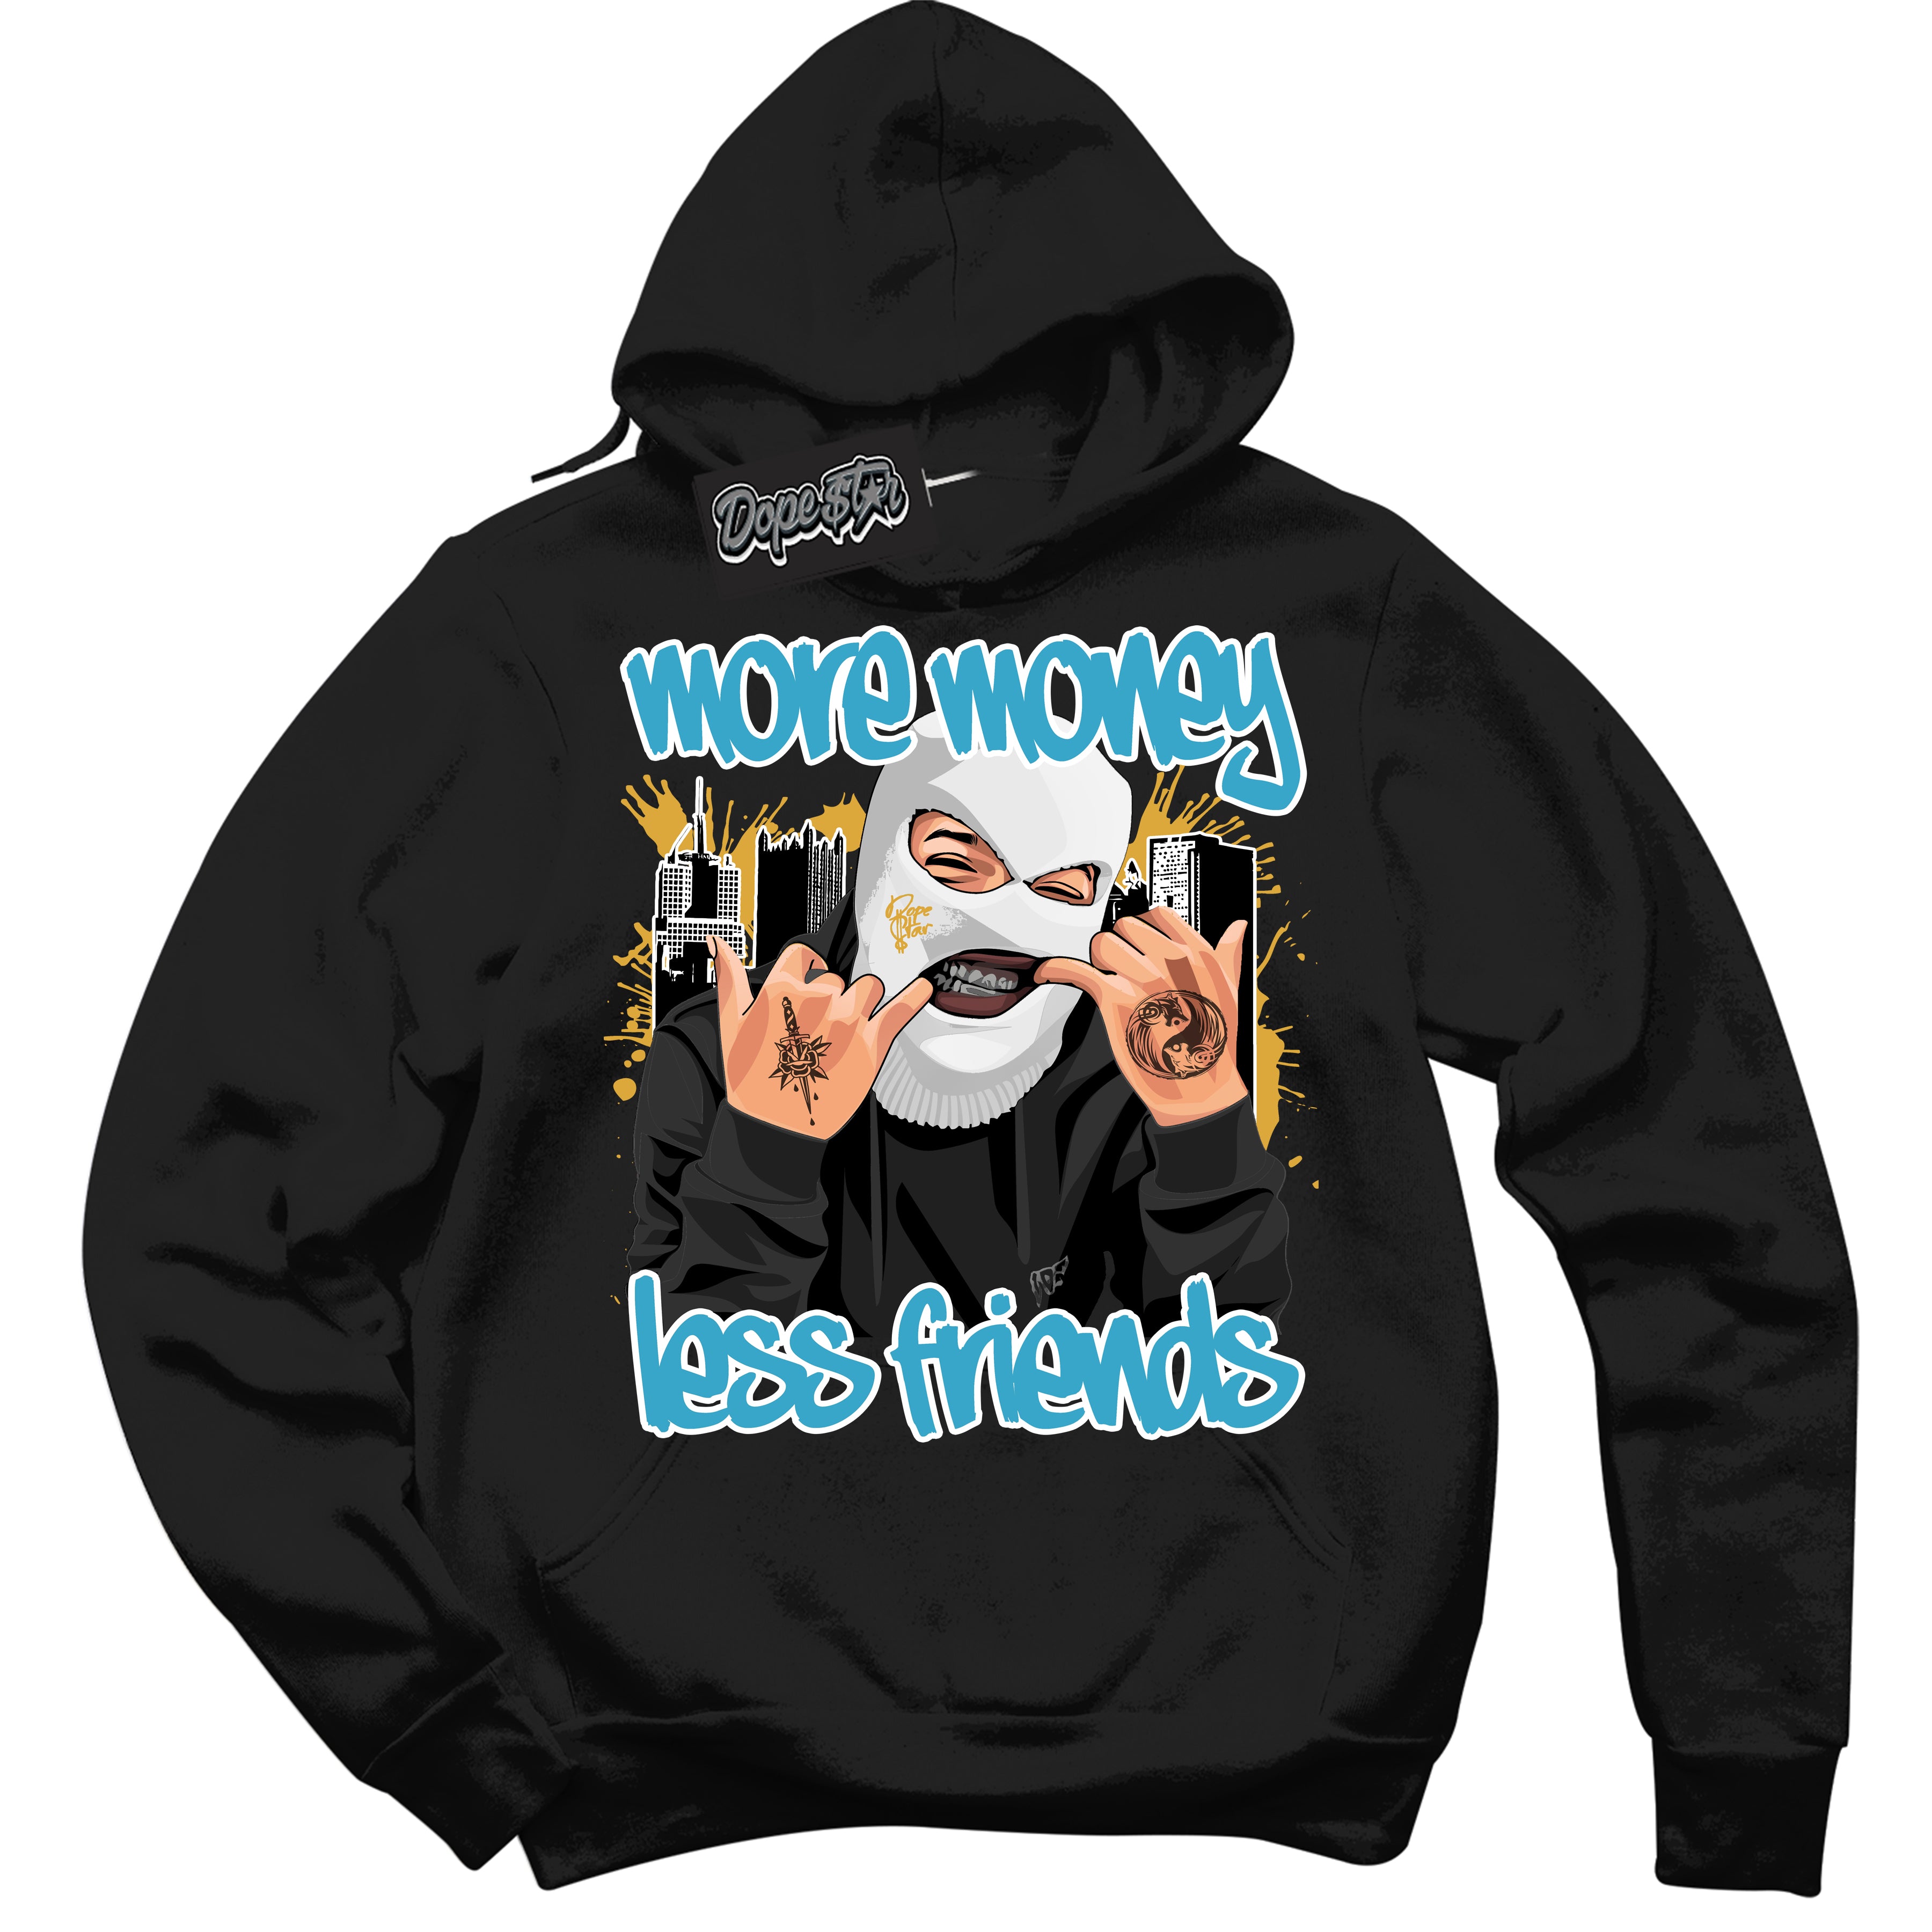 Cool Black Hoodie with “ More Money Less Friends ”  design that Perfectly Matches Aqua 5s Sneakers.